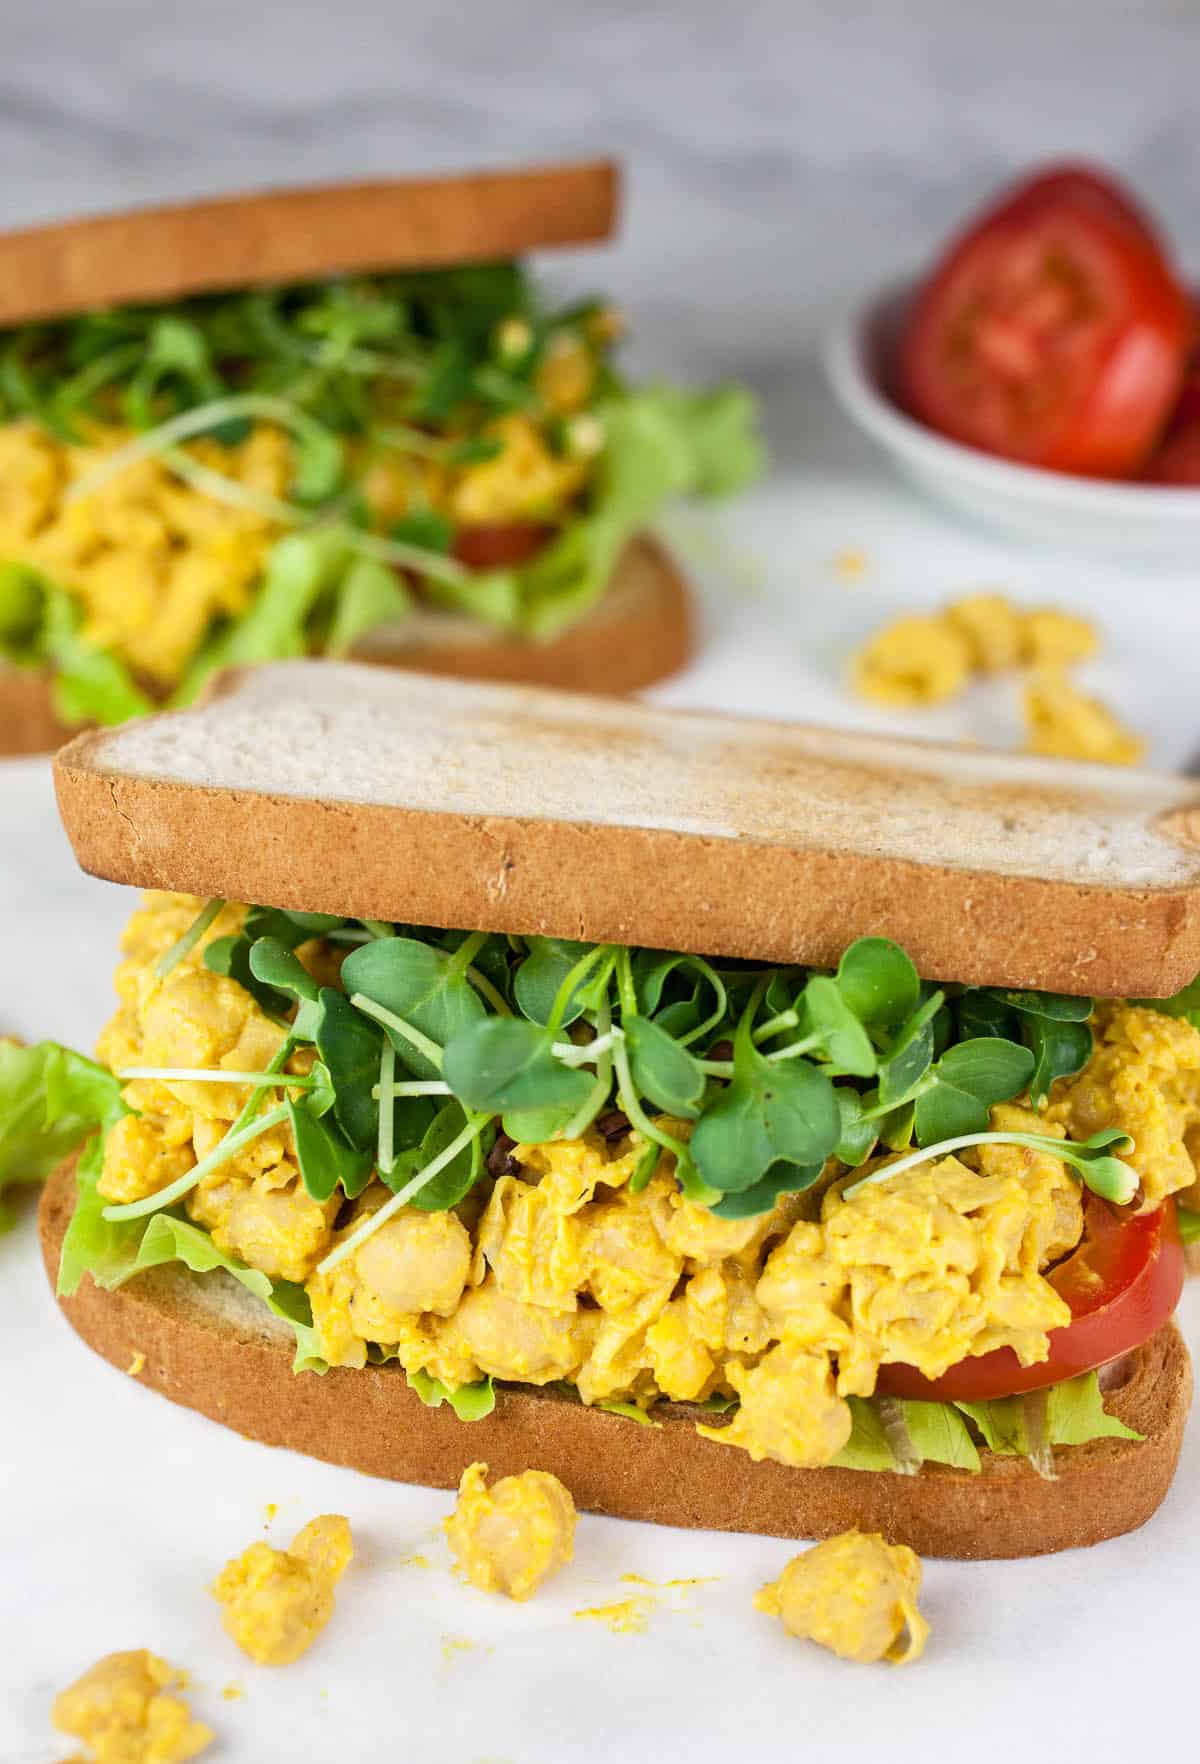 Curried chickpea salad sandwiches with fresh veggies.